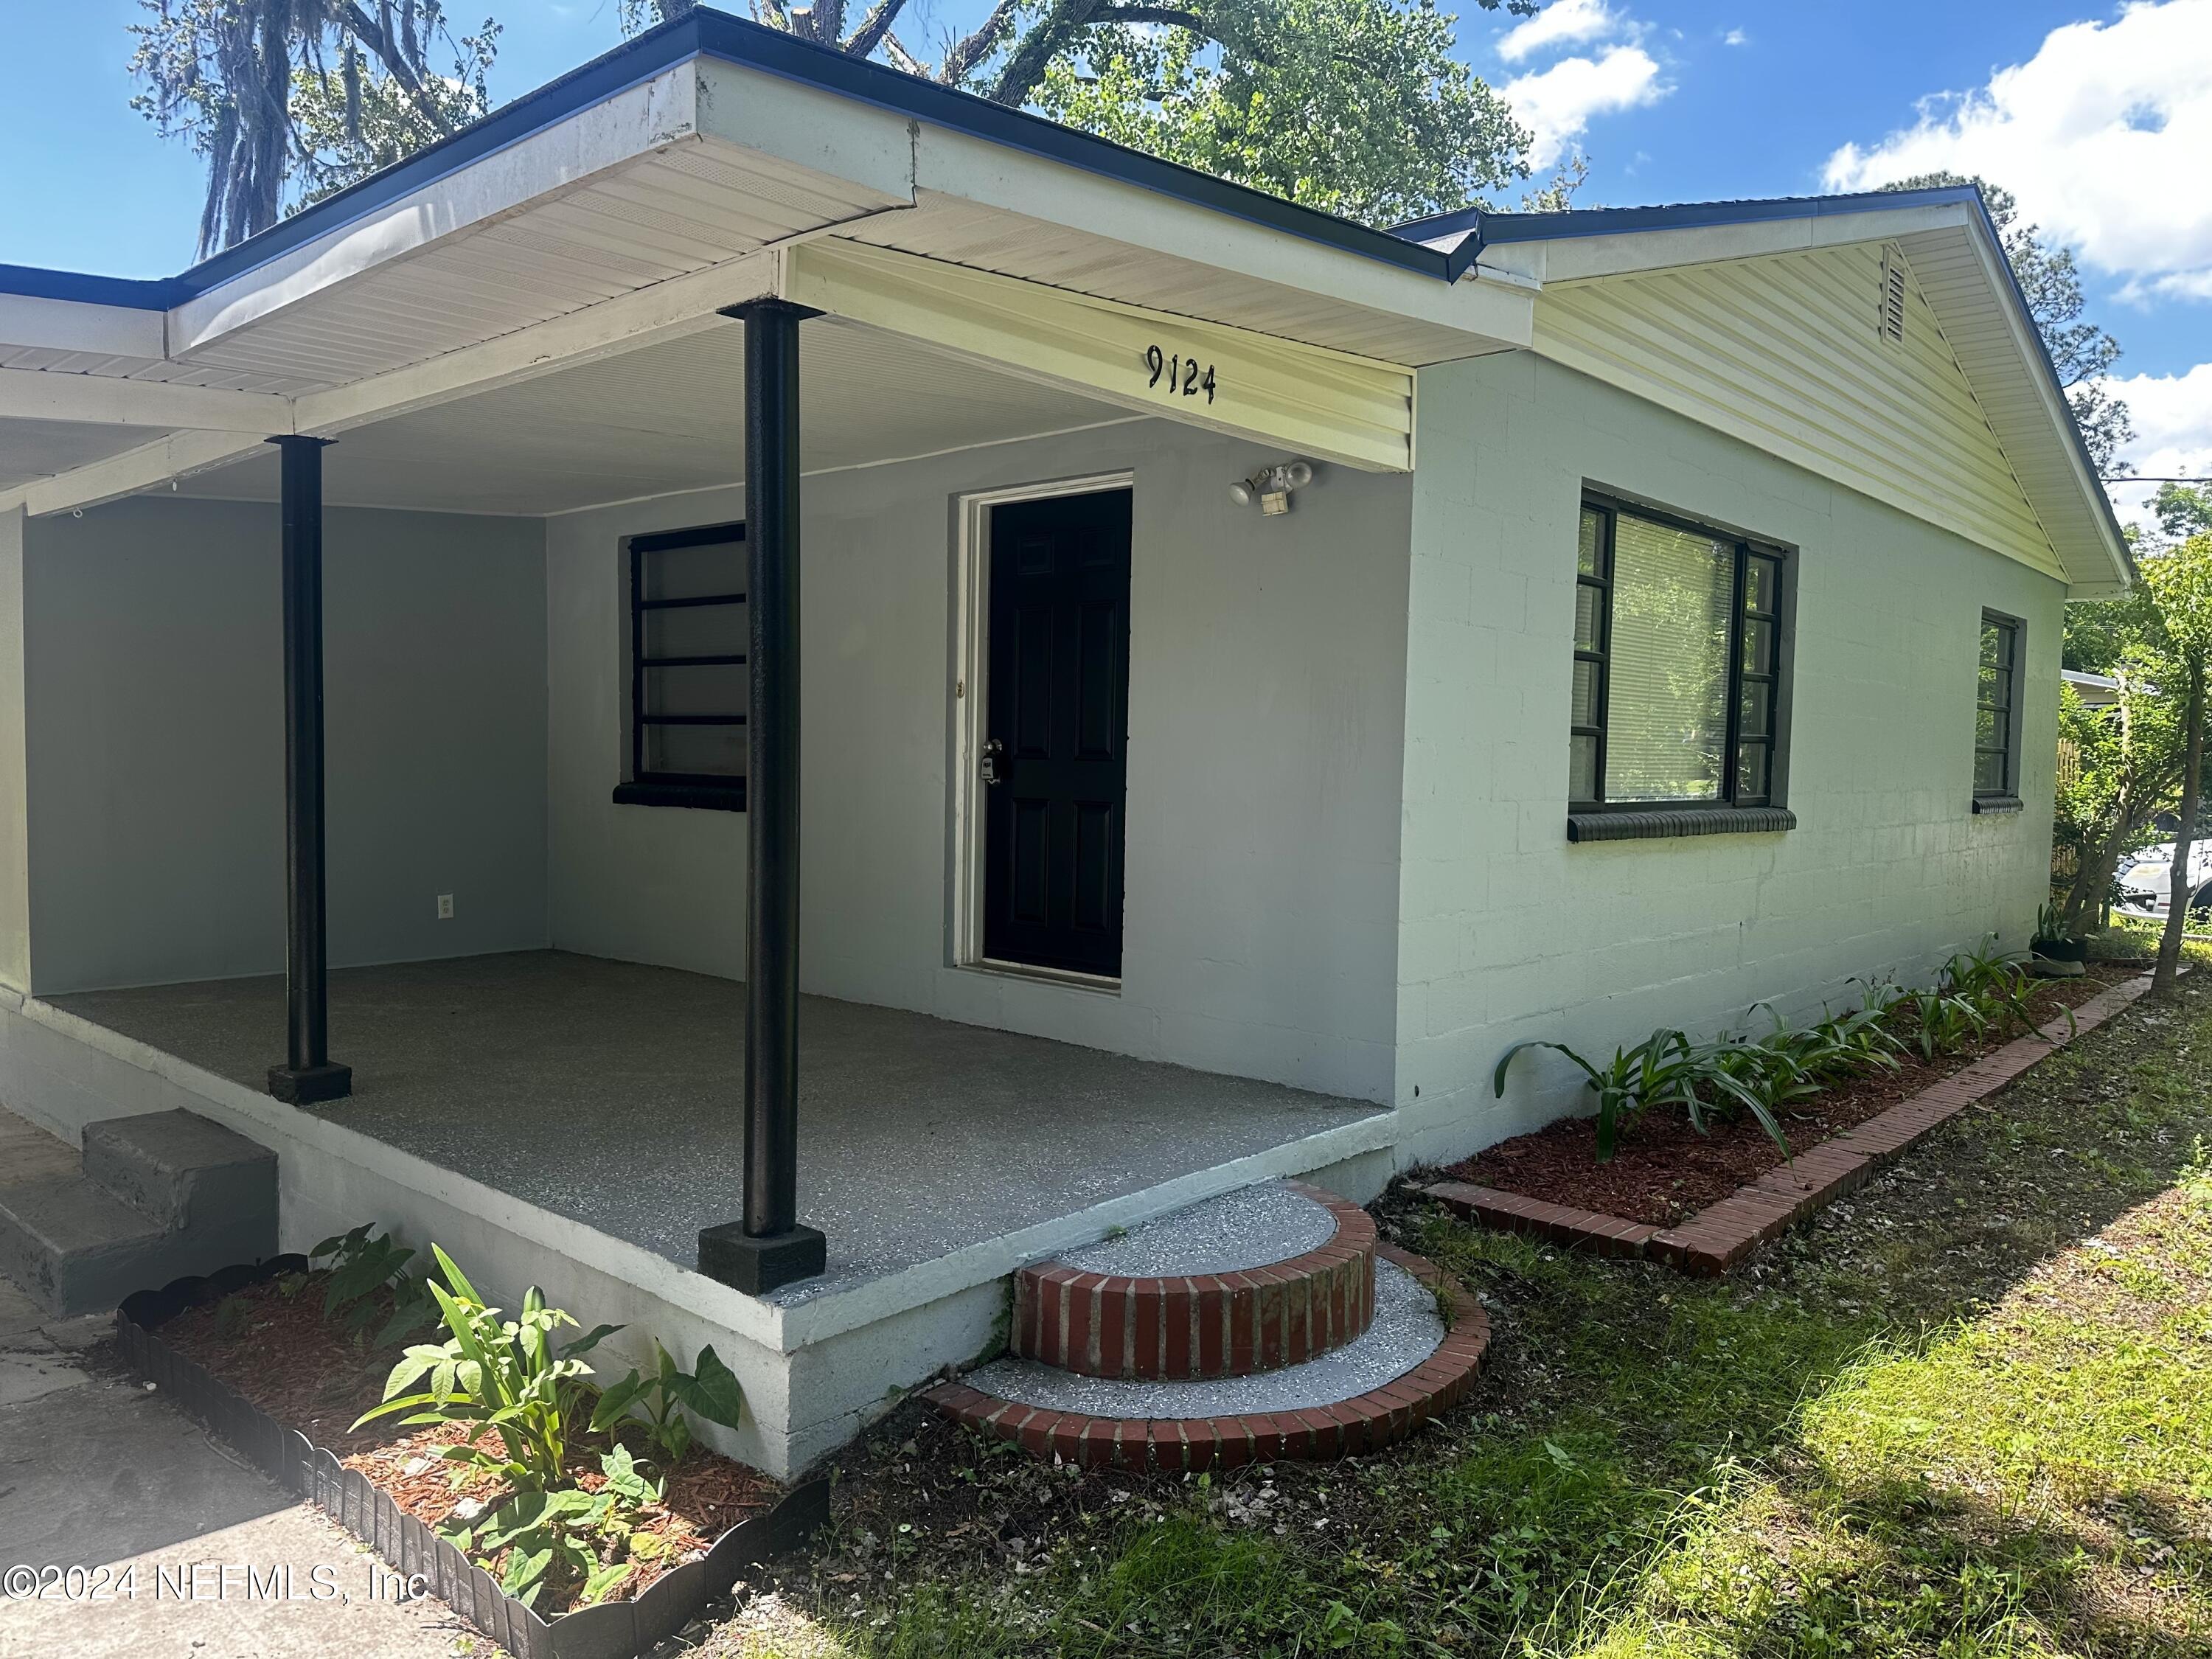 Jacksonville, FL home for sale located at 9124 8th Avenue, Jacksonville, FL 32208